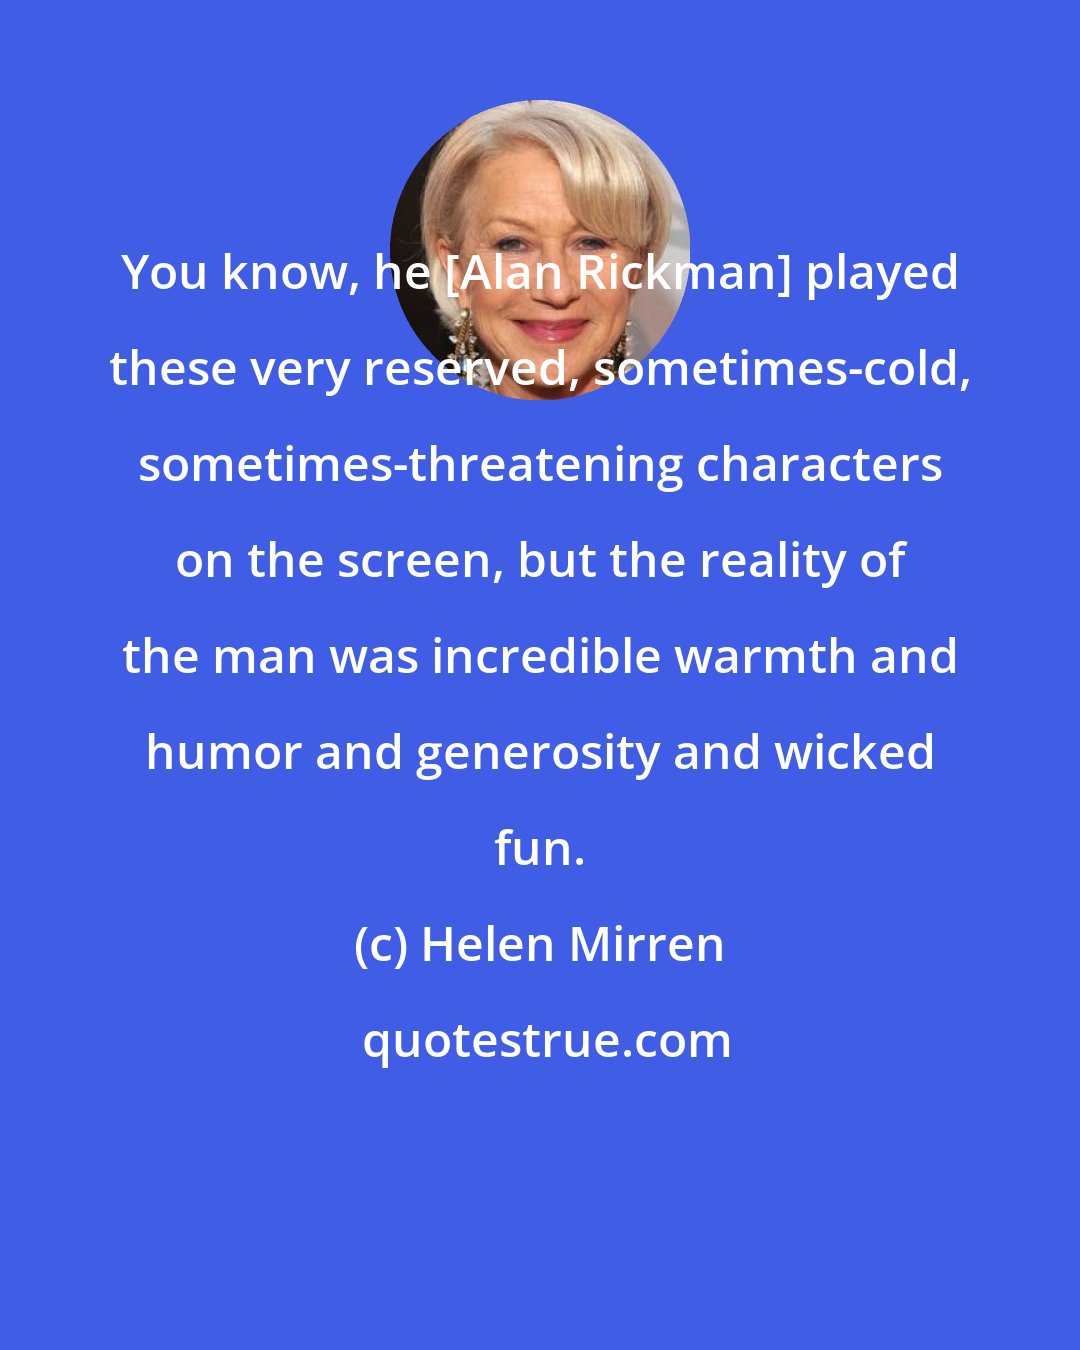 Helen Mirren: You know, he [Alan Rickman] played these very reserved, sometimes-cold, sometimes-threatening characters on the screen, but the reality of the man was incredible warmth and humor and generosity and wicked fun.